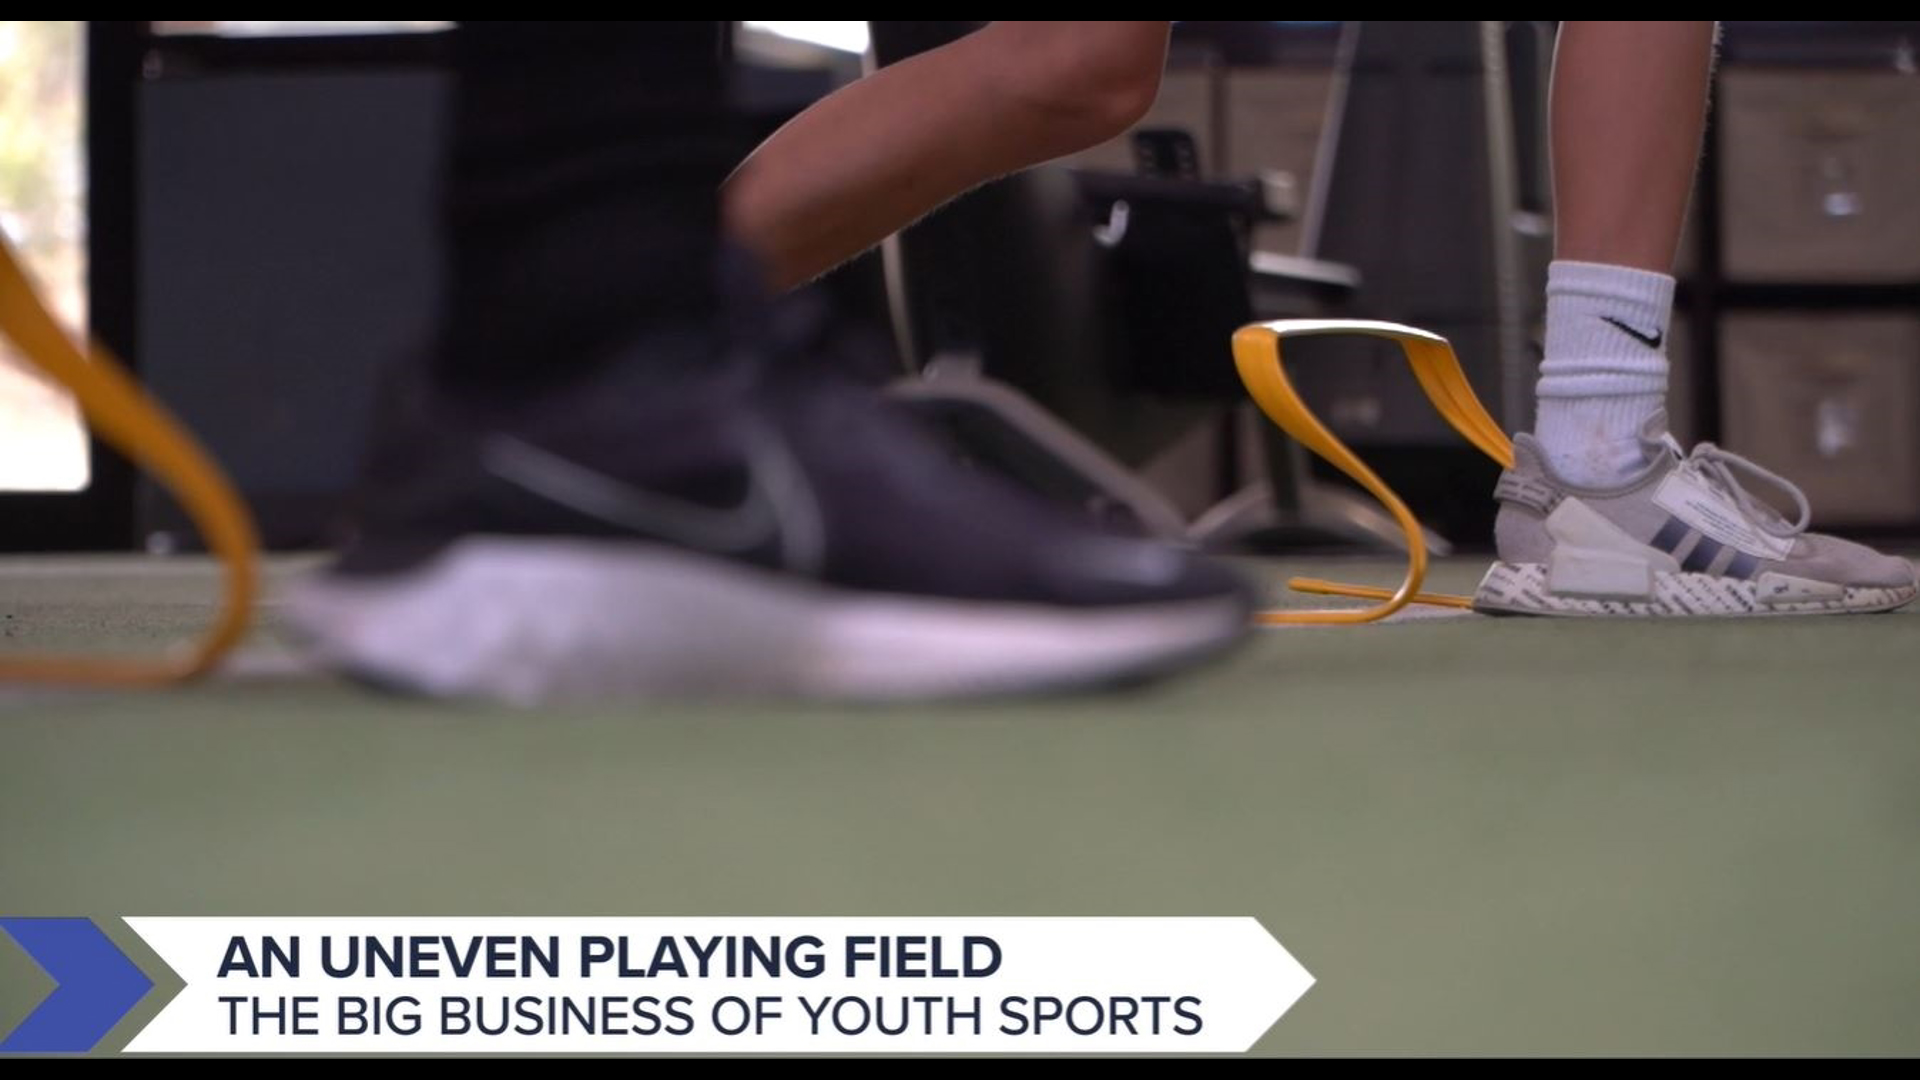 WUSA takes a look at the ultra-competitive, ultra-expensive world of youth sports. Pay-to-play costs and travel sports is creating an uneven playing field for some.